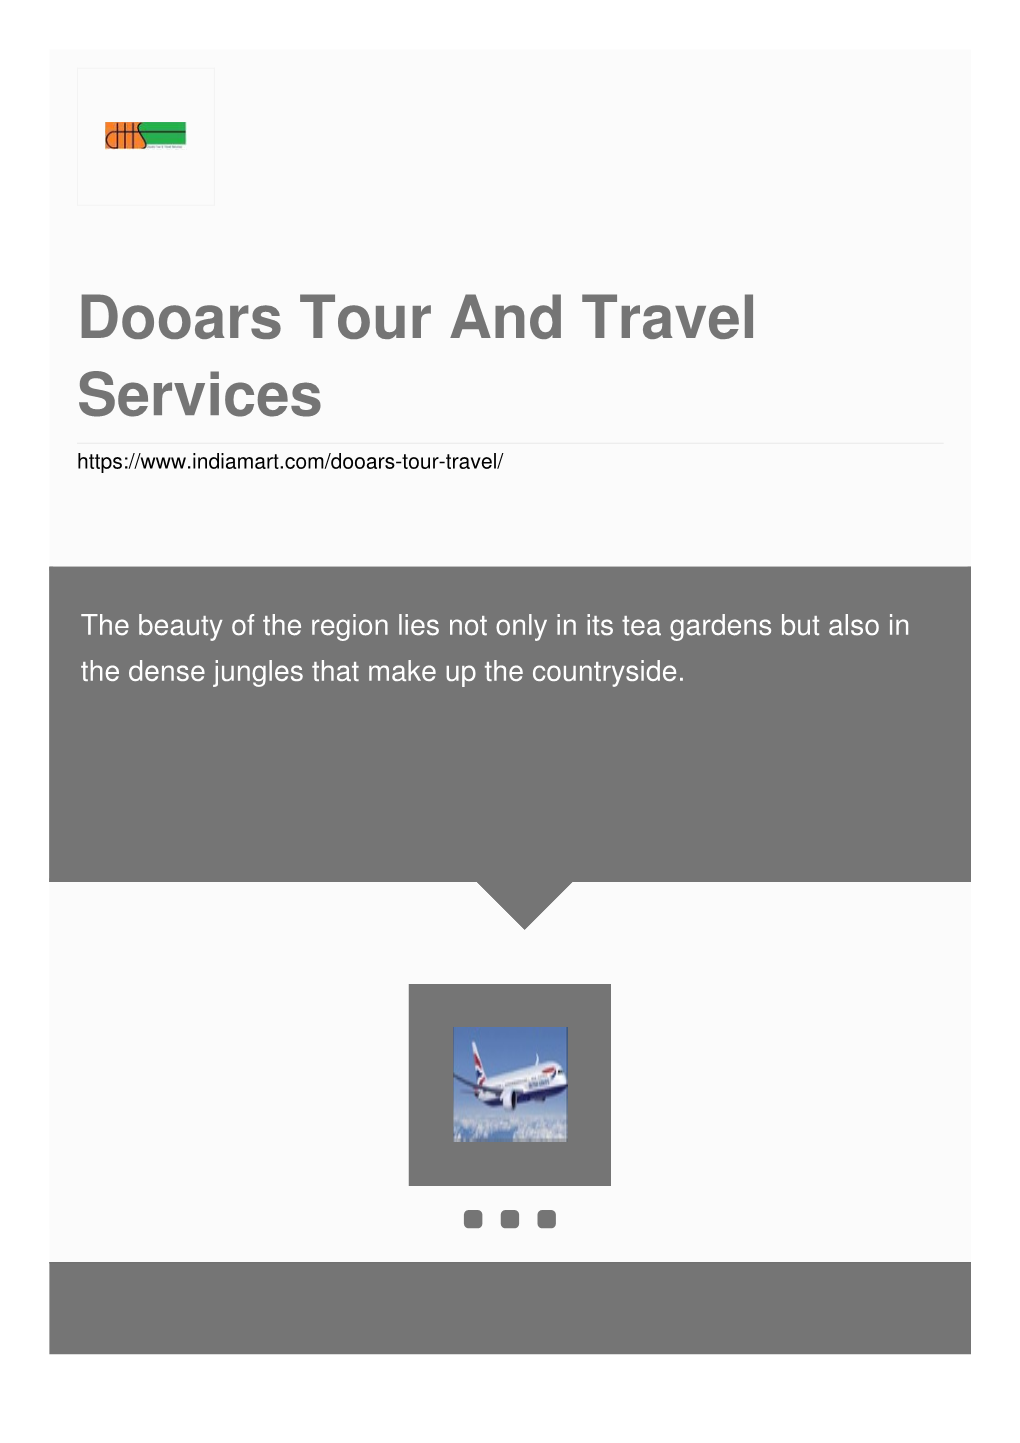 Dooars Tour and Travel Services